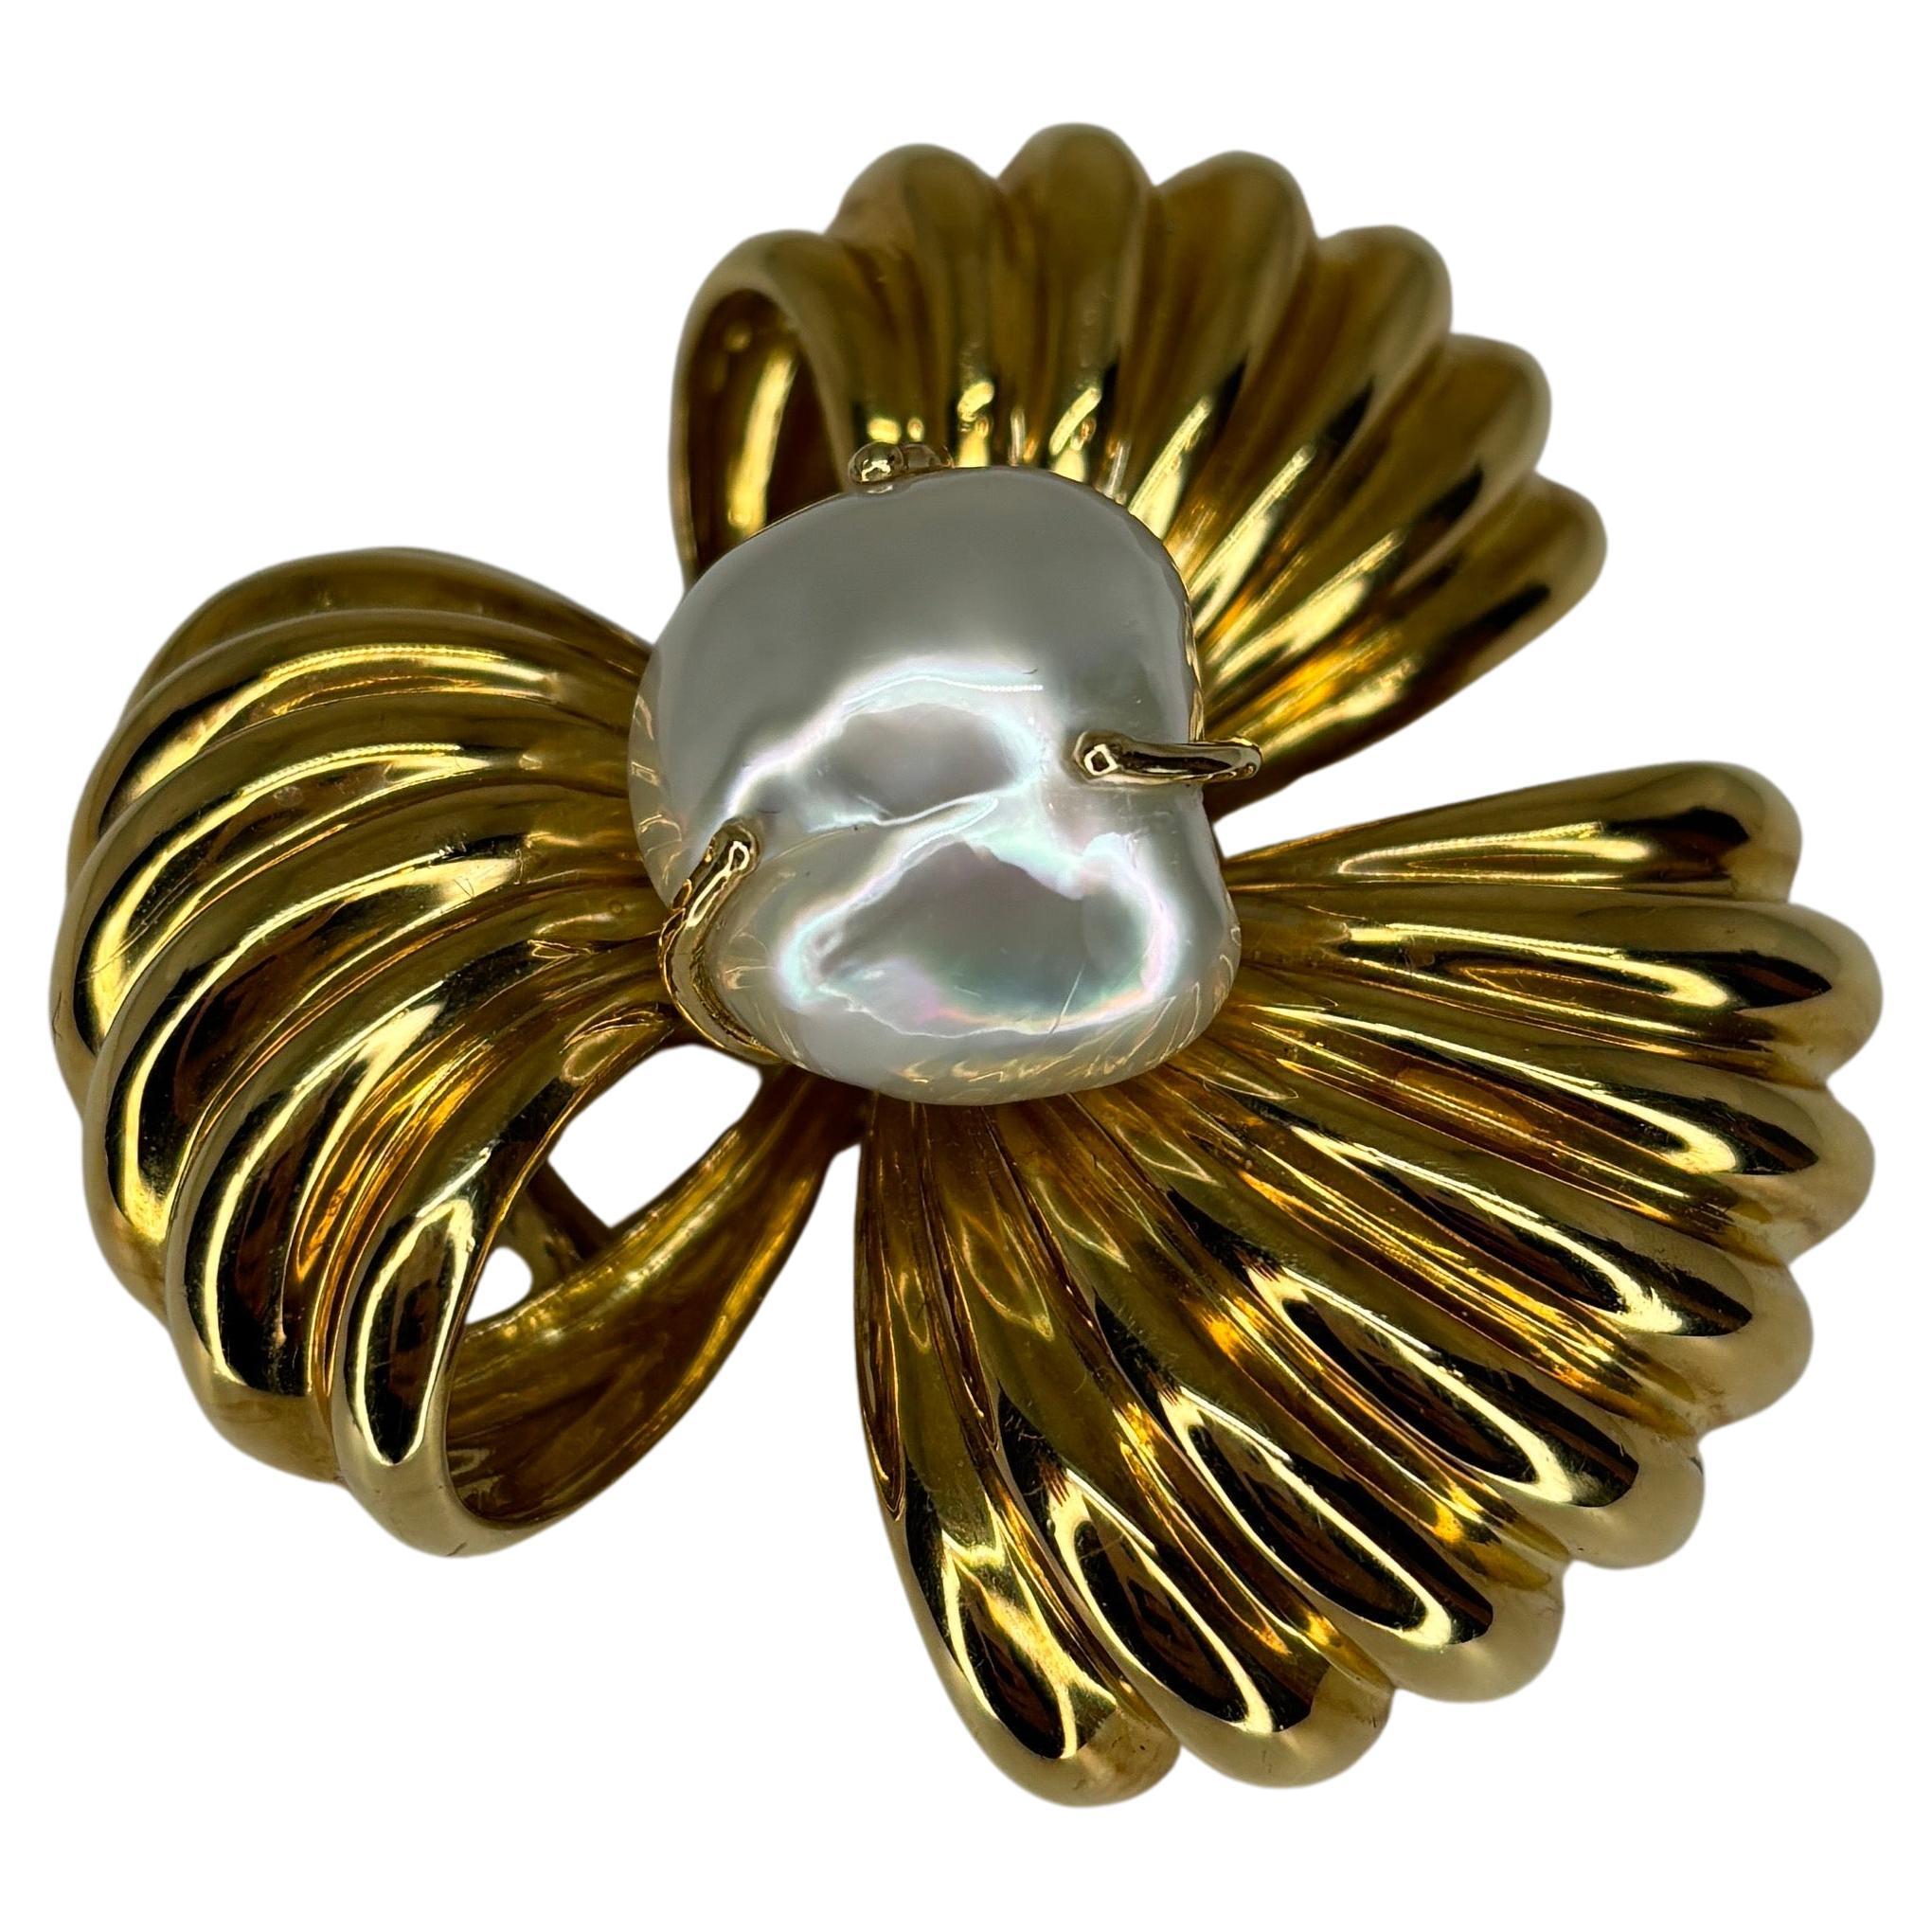 Luxurious large brooch featuring a large white baroque pearl at the center of ribbed looped ribbons of 18k yellow gold.

Baroque pearls are known for their irregular, non-spherical shapes, which give them a distinct and often dramatic appearance.